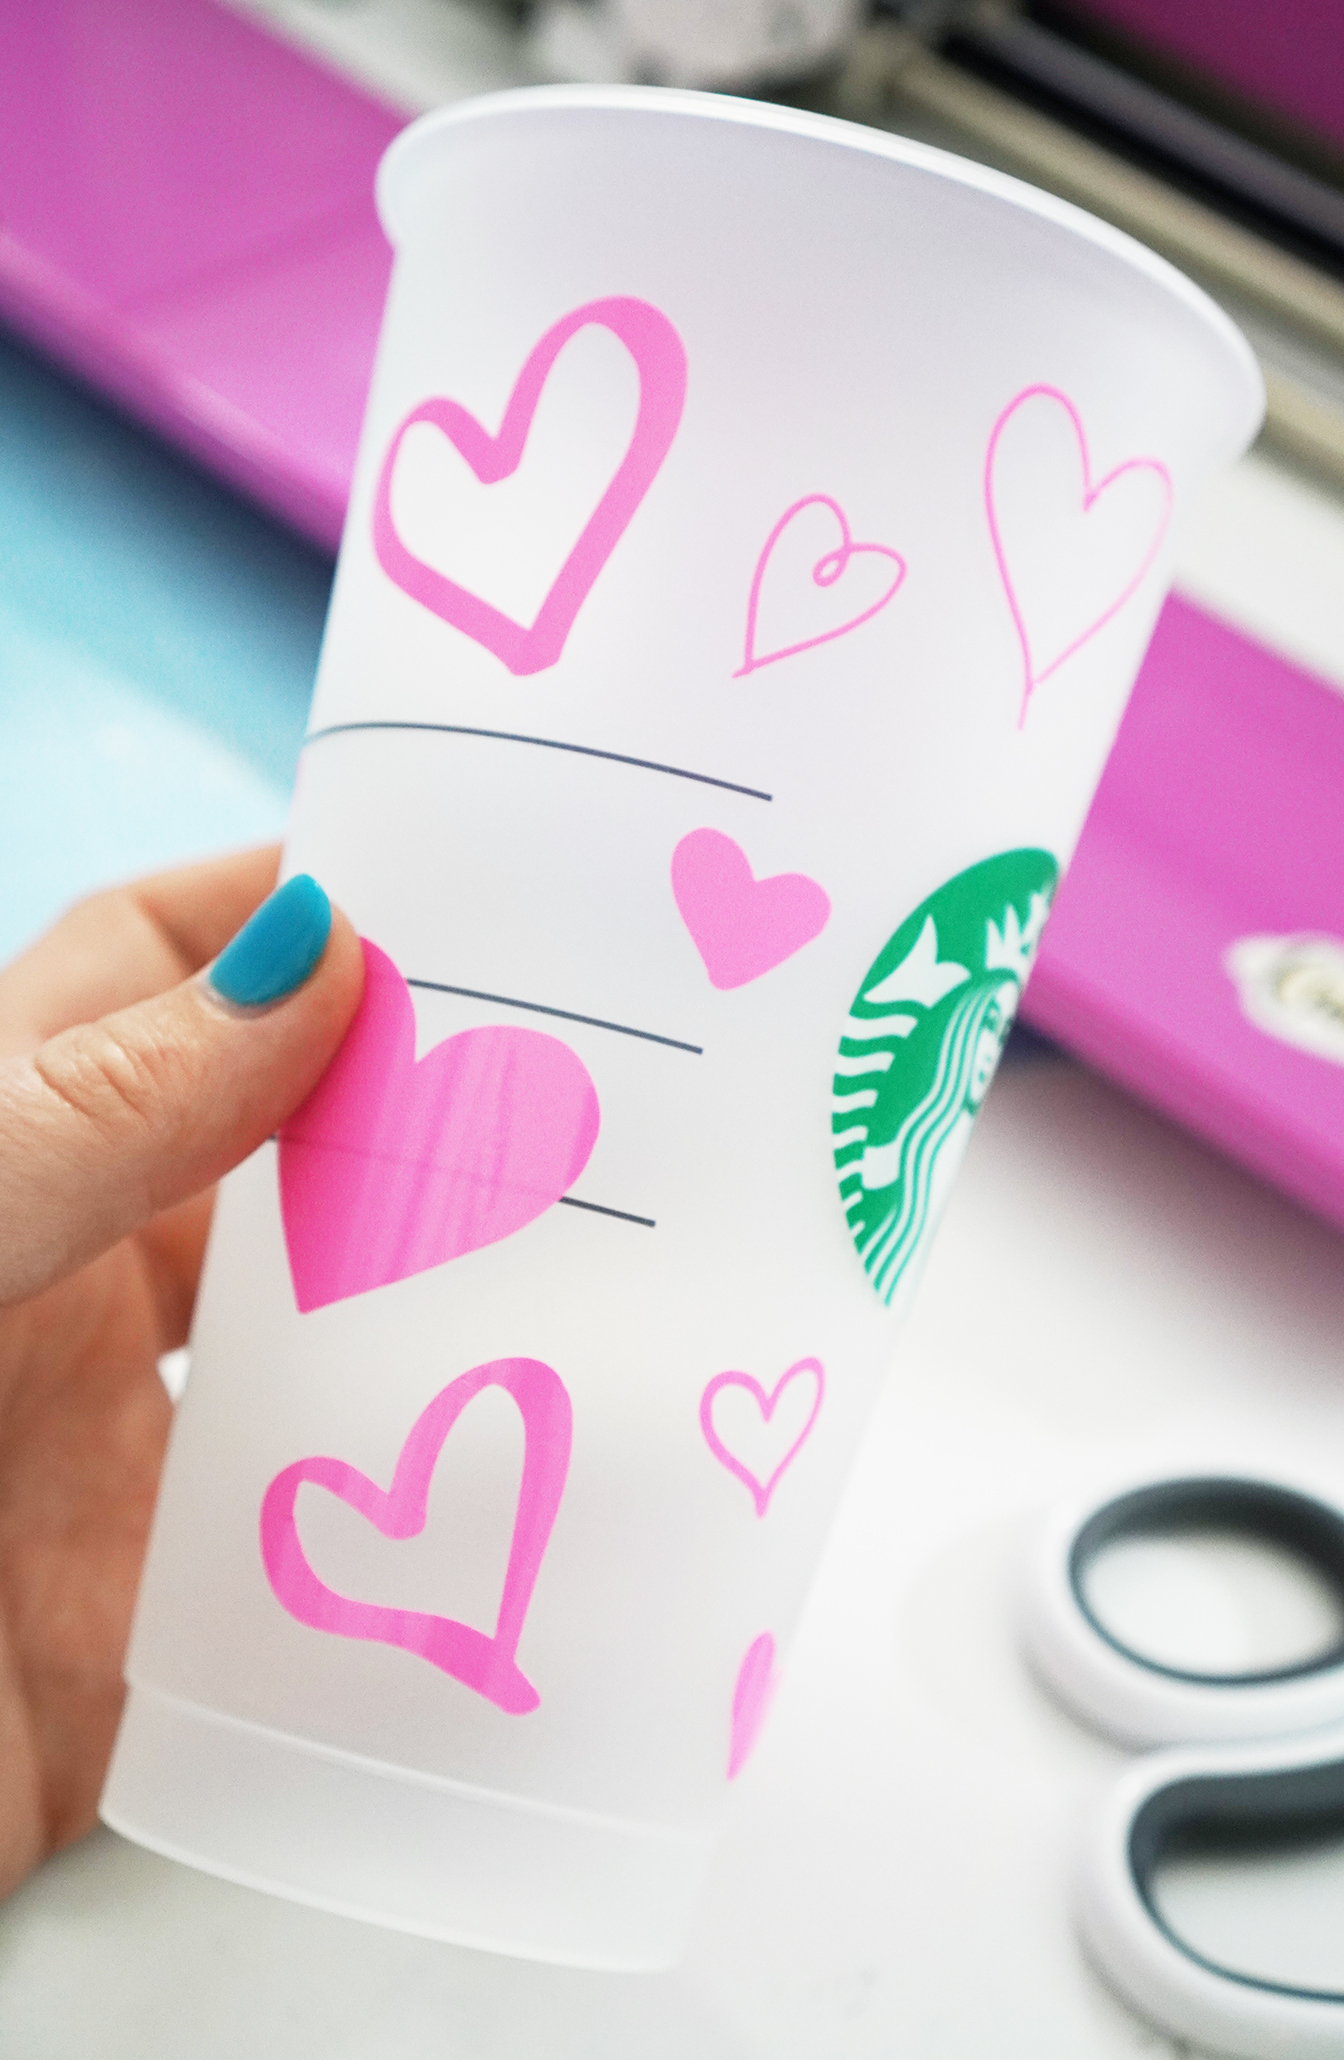 Color Changing Starbucks Cup, Full Wrap Hearts Starbucks Cold Cup